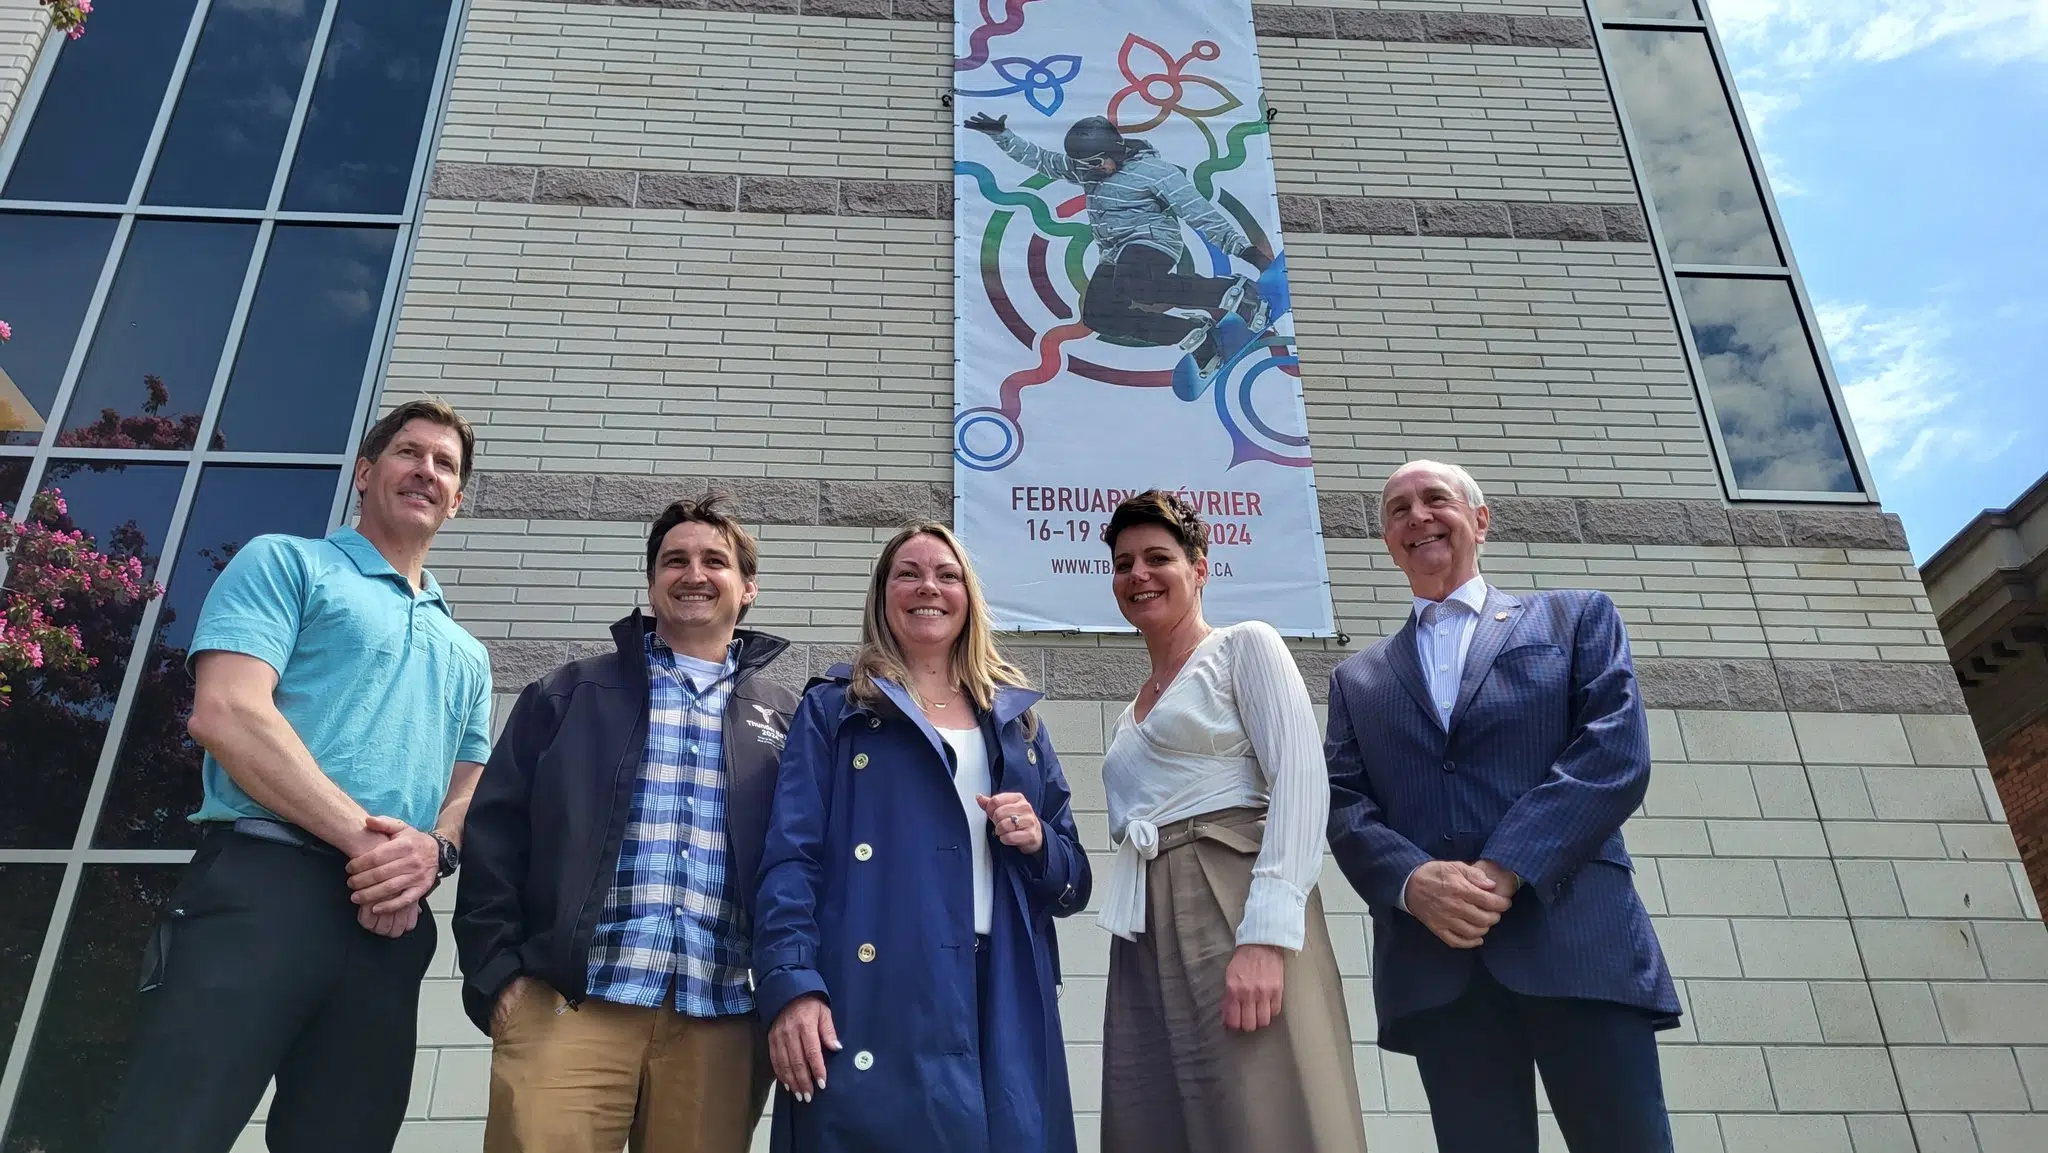 Hydro One to be presenting sponsor for 2024 Ontario Winter Games